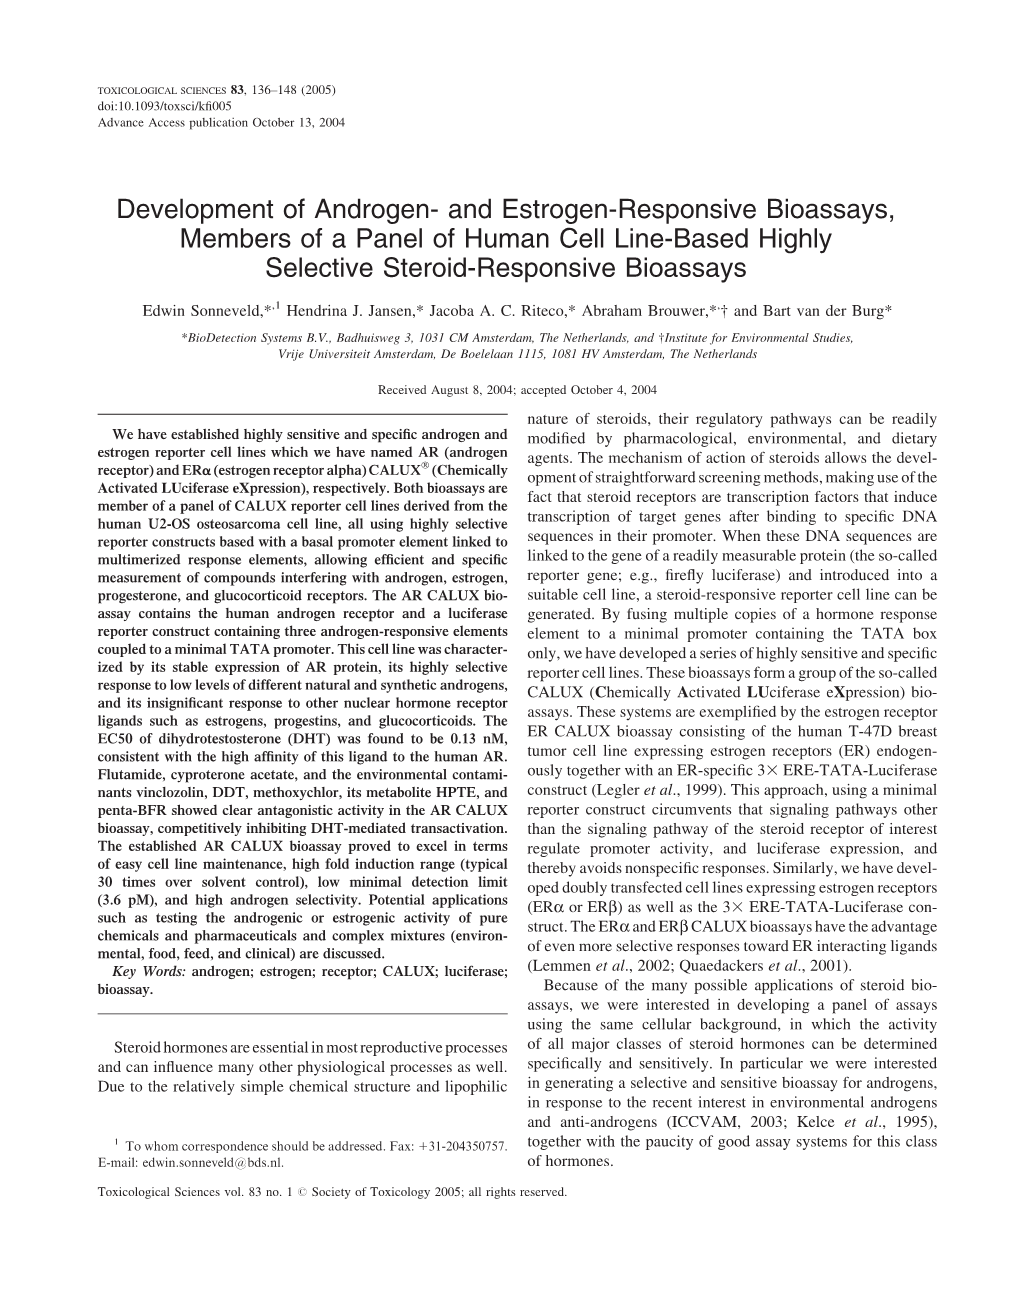 And Estrogen-Responsive Bioassays, Members of a Panel of Human Cell Line-Based Highly Selective Steroid-Responsive Bioassays